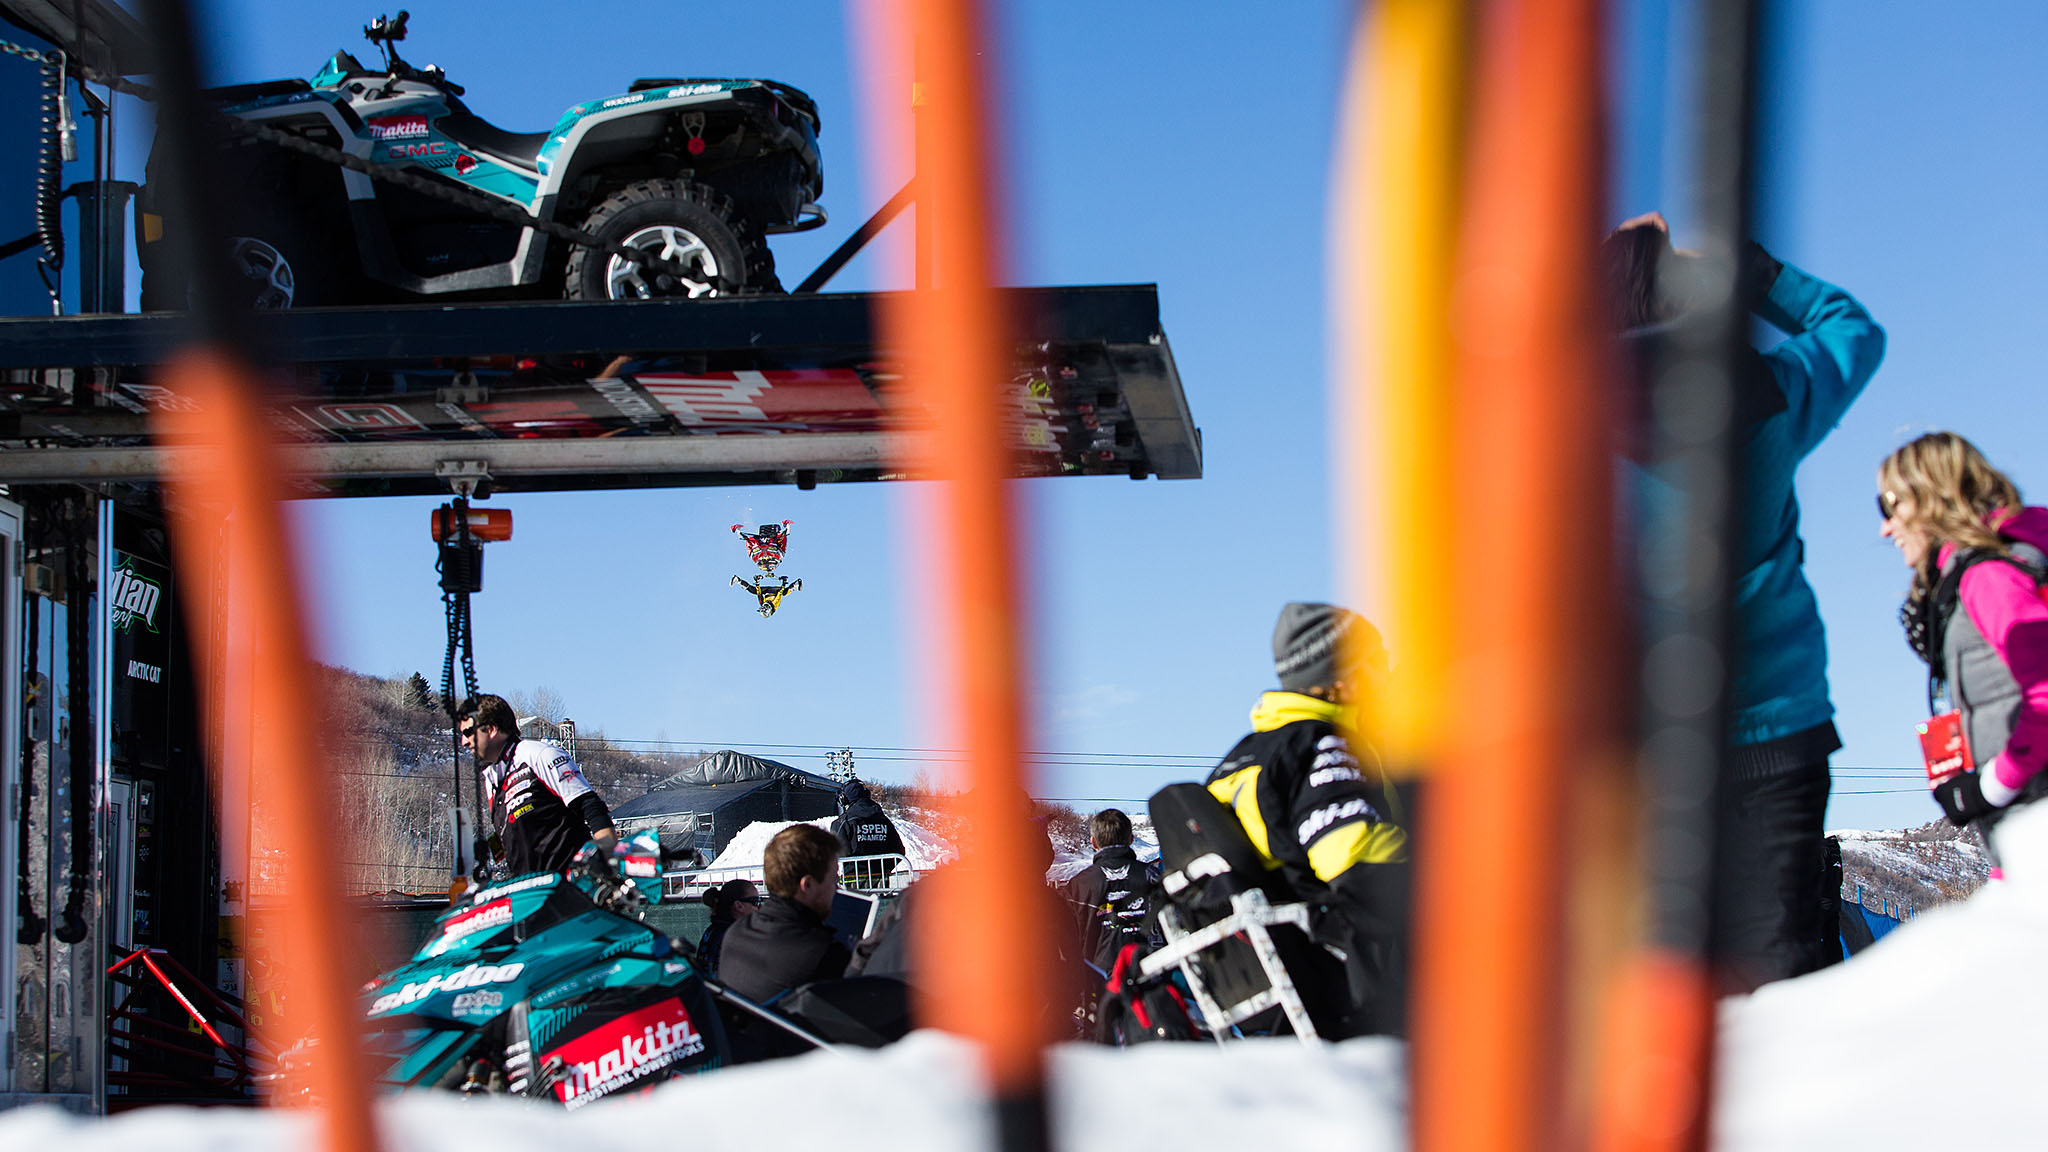 Nineteen competitions in three sports will be contested at XG Aspen 2016, including Monster Energy Snowmobile Freestyle. On Wednesday afternoon, defending gold medalist, Colten Moore, who won the event the last time it was held in 2014, practiced hard for another win.